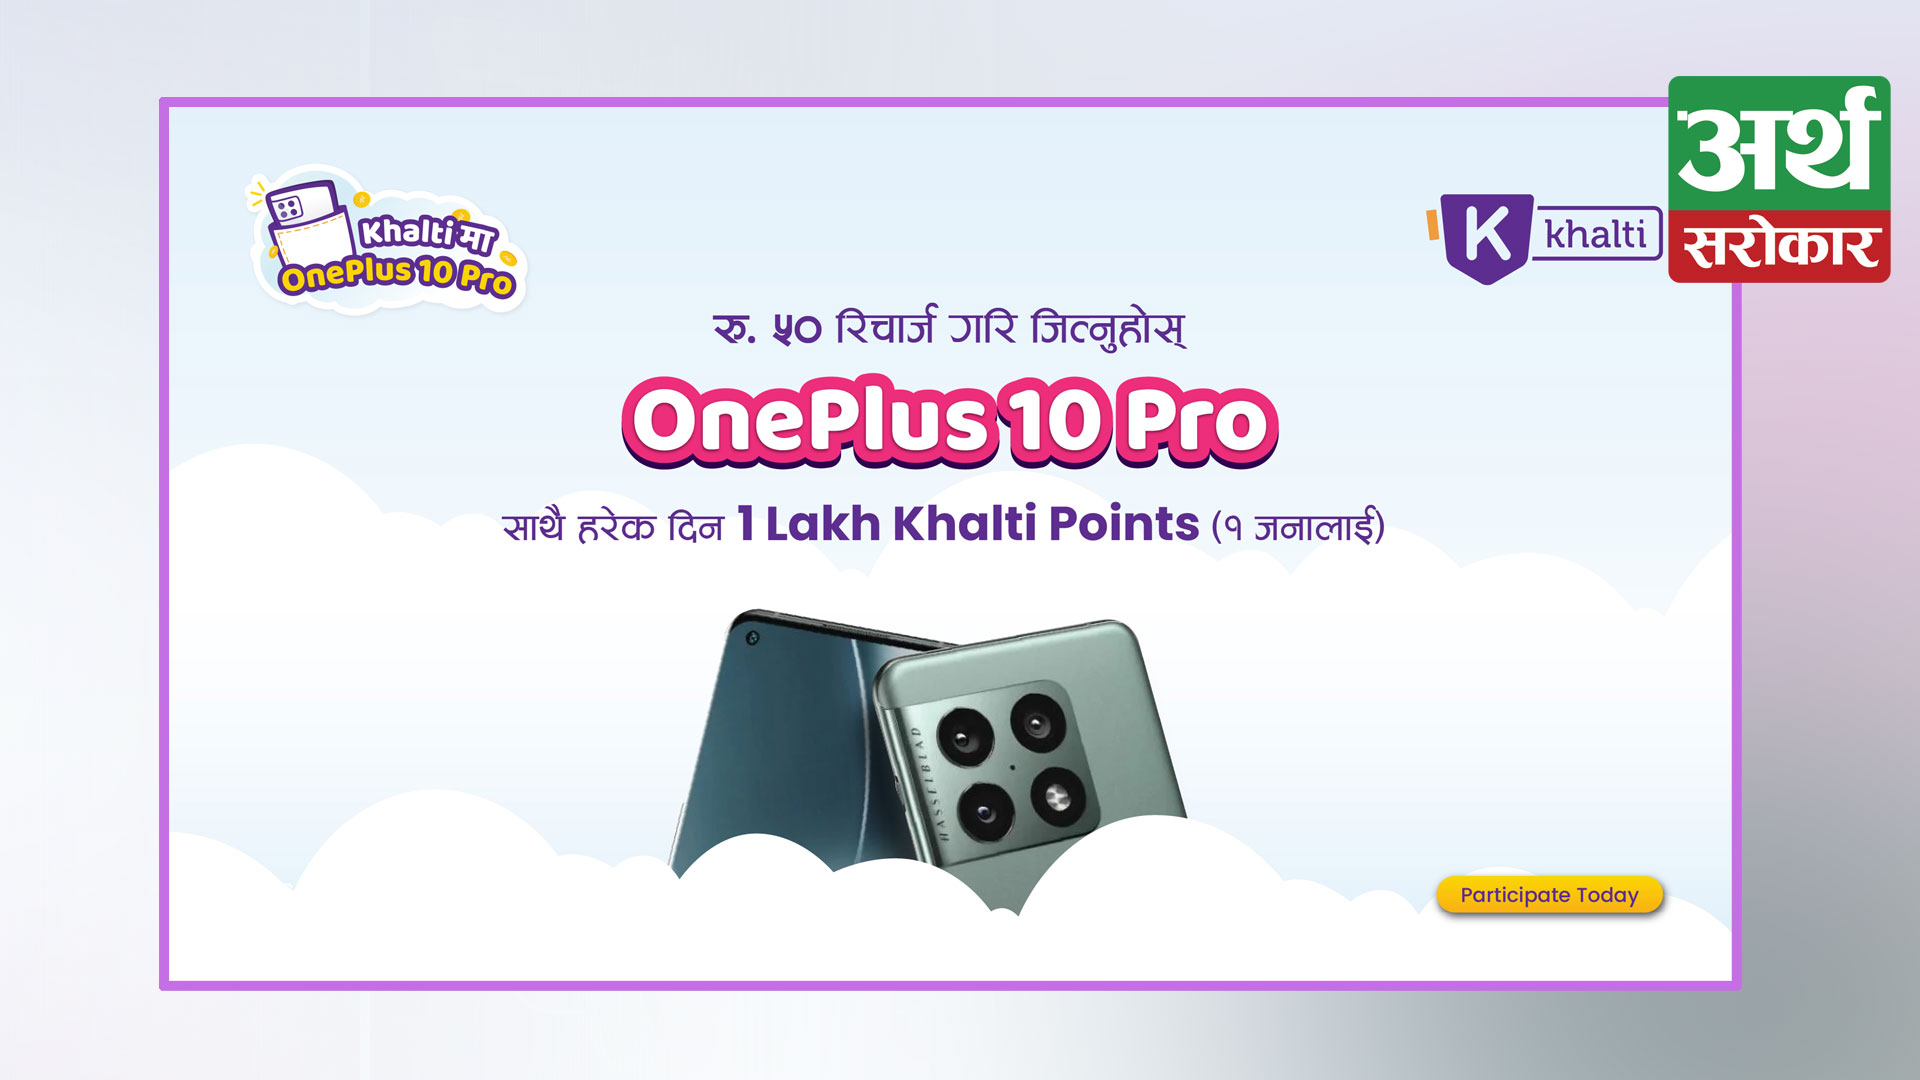 Win OnePlus 10 Pro worth Rs. 1,35,000 on Recharge of Rs. 50 from Khalti